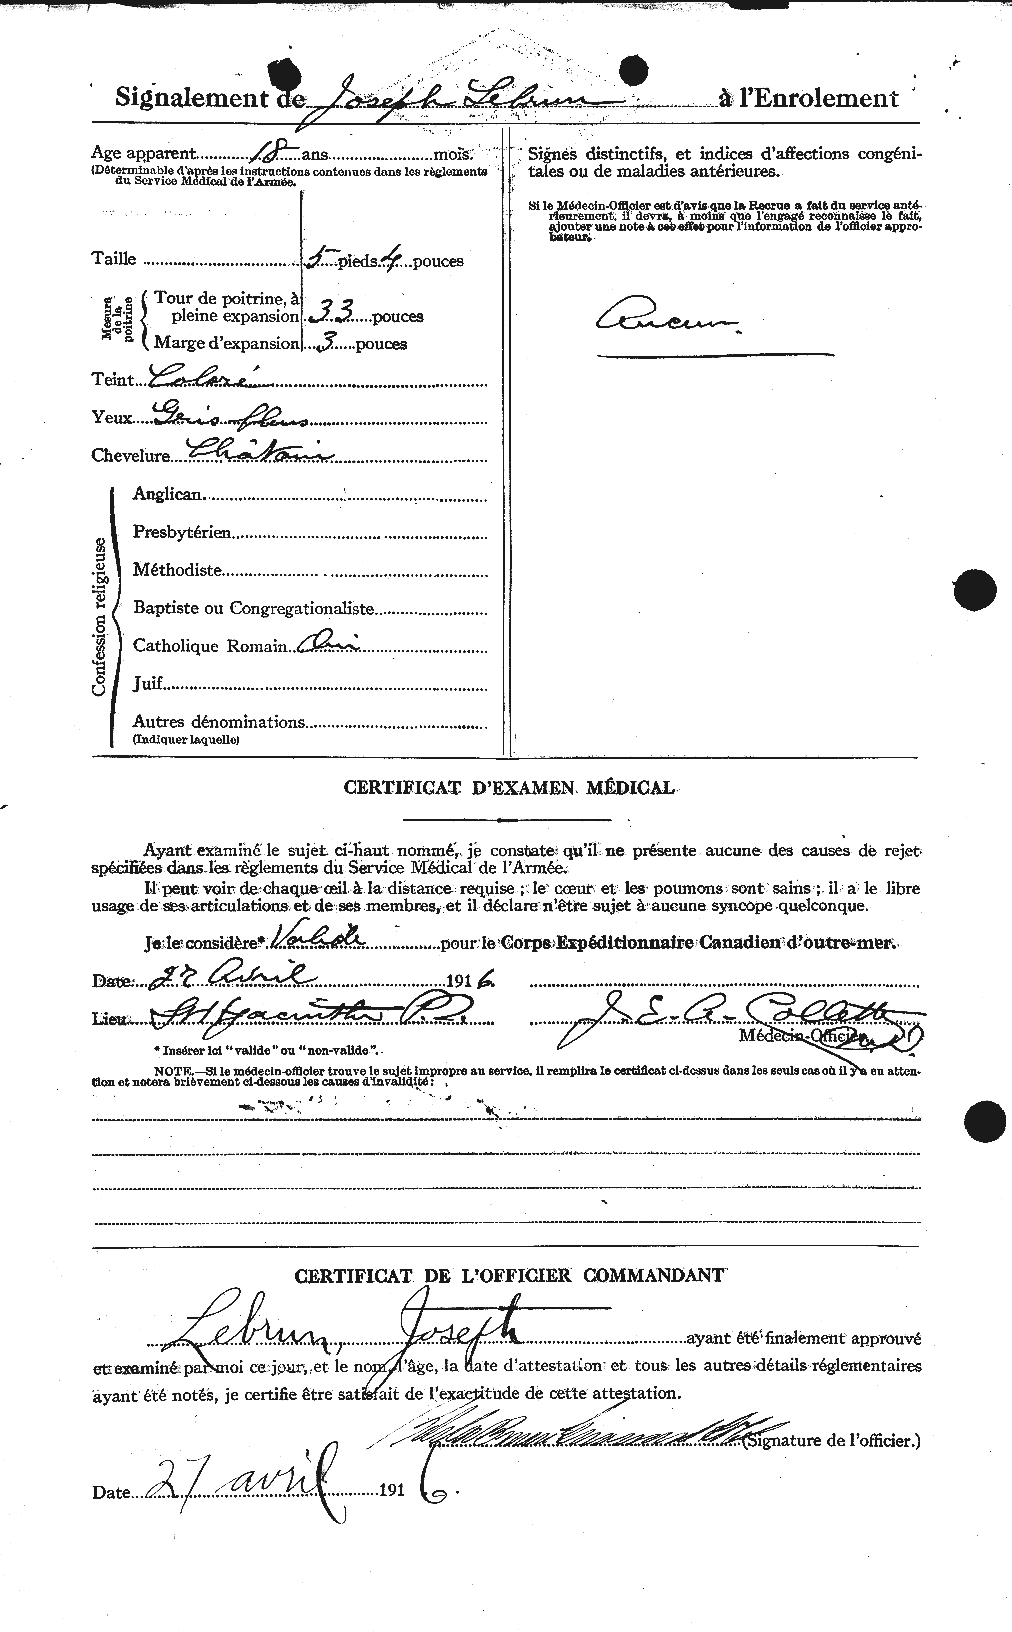 Personnel Records of the First World War - CEF 461571b